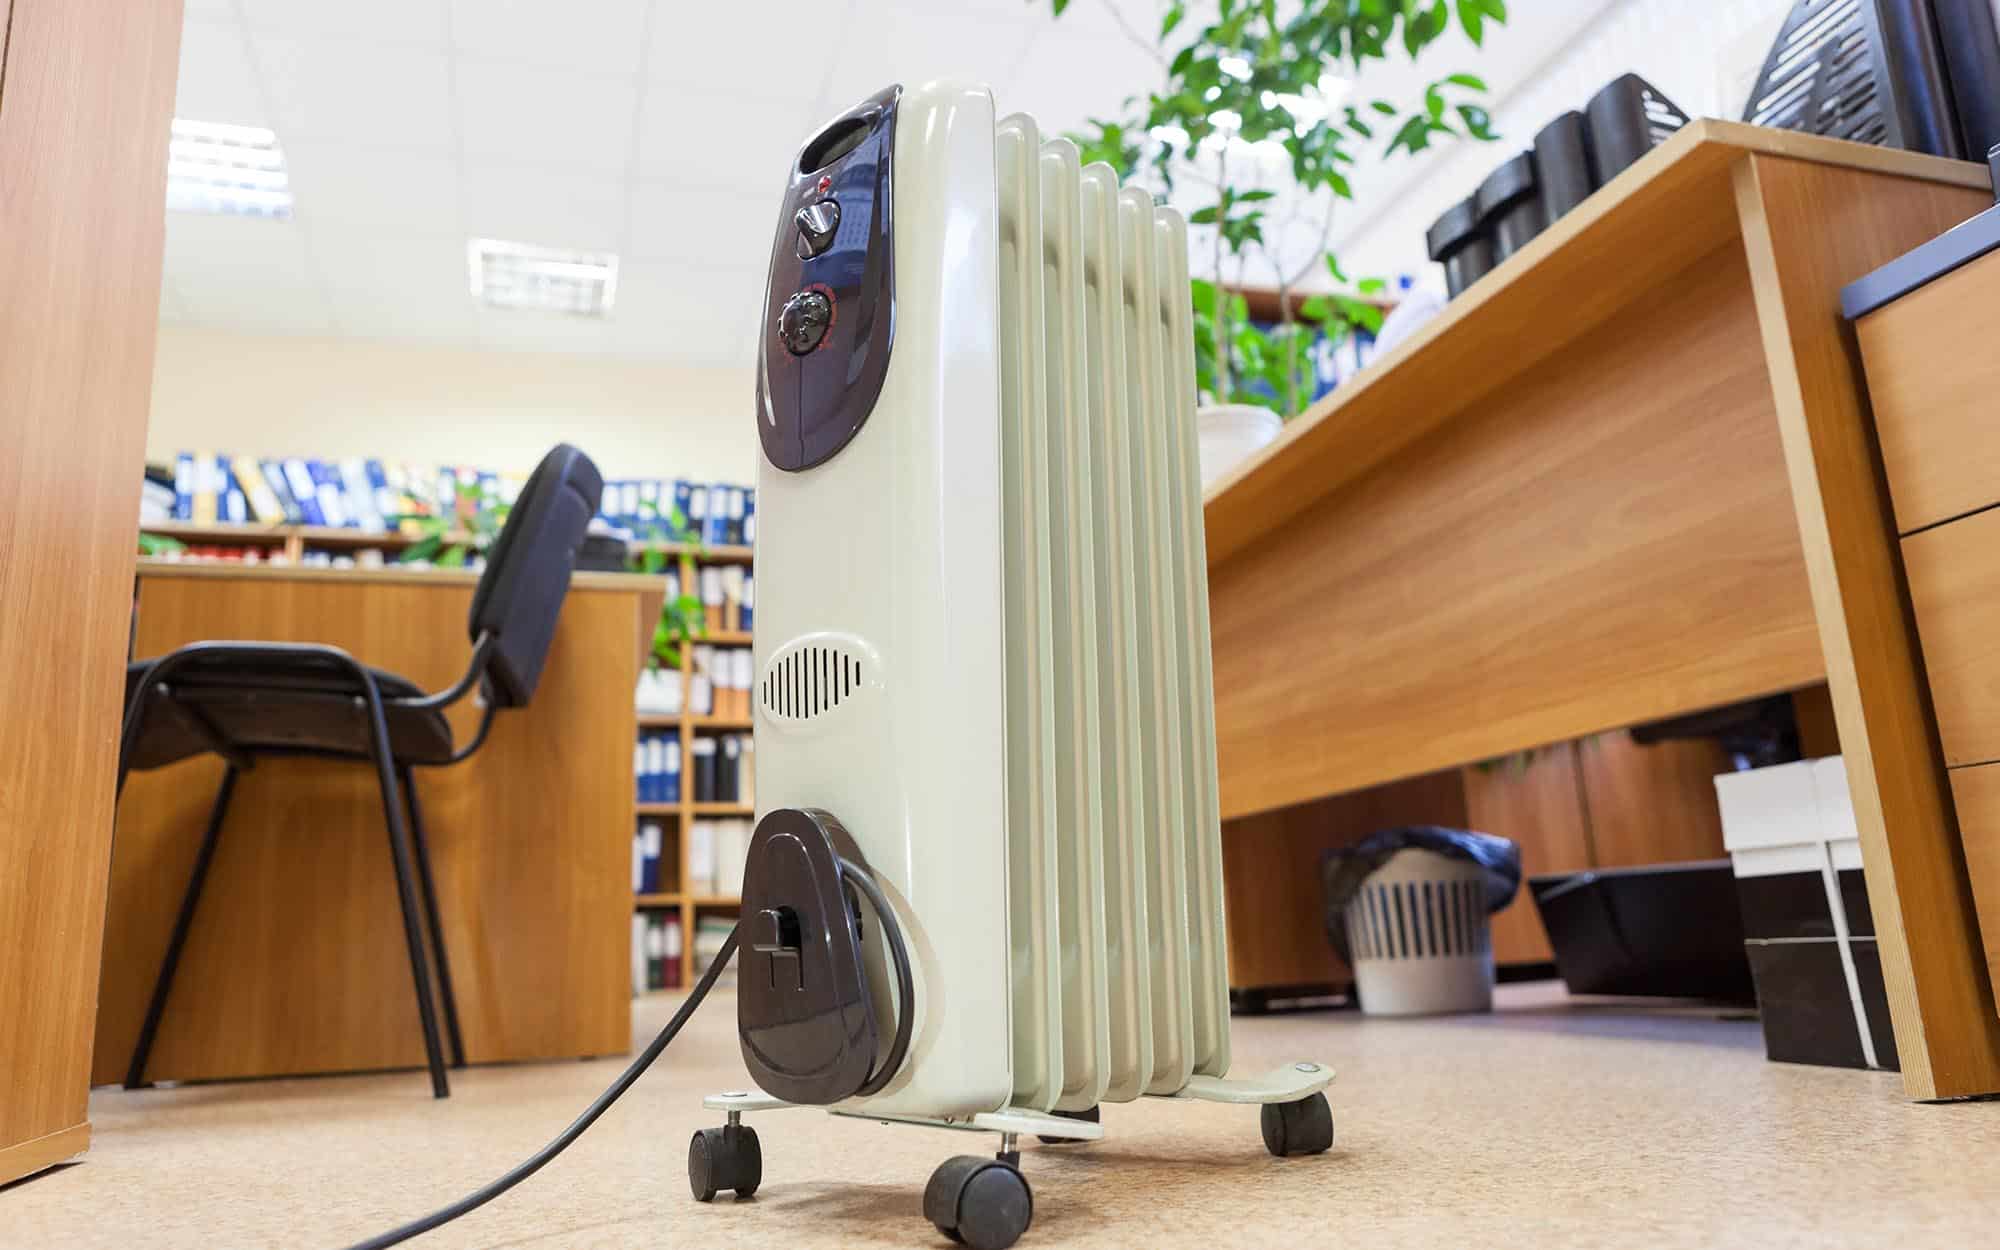 Image of a space heater inside of an office space.